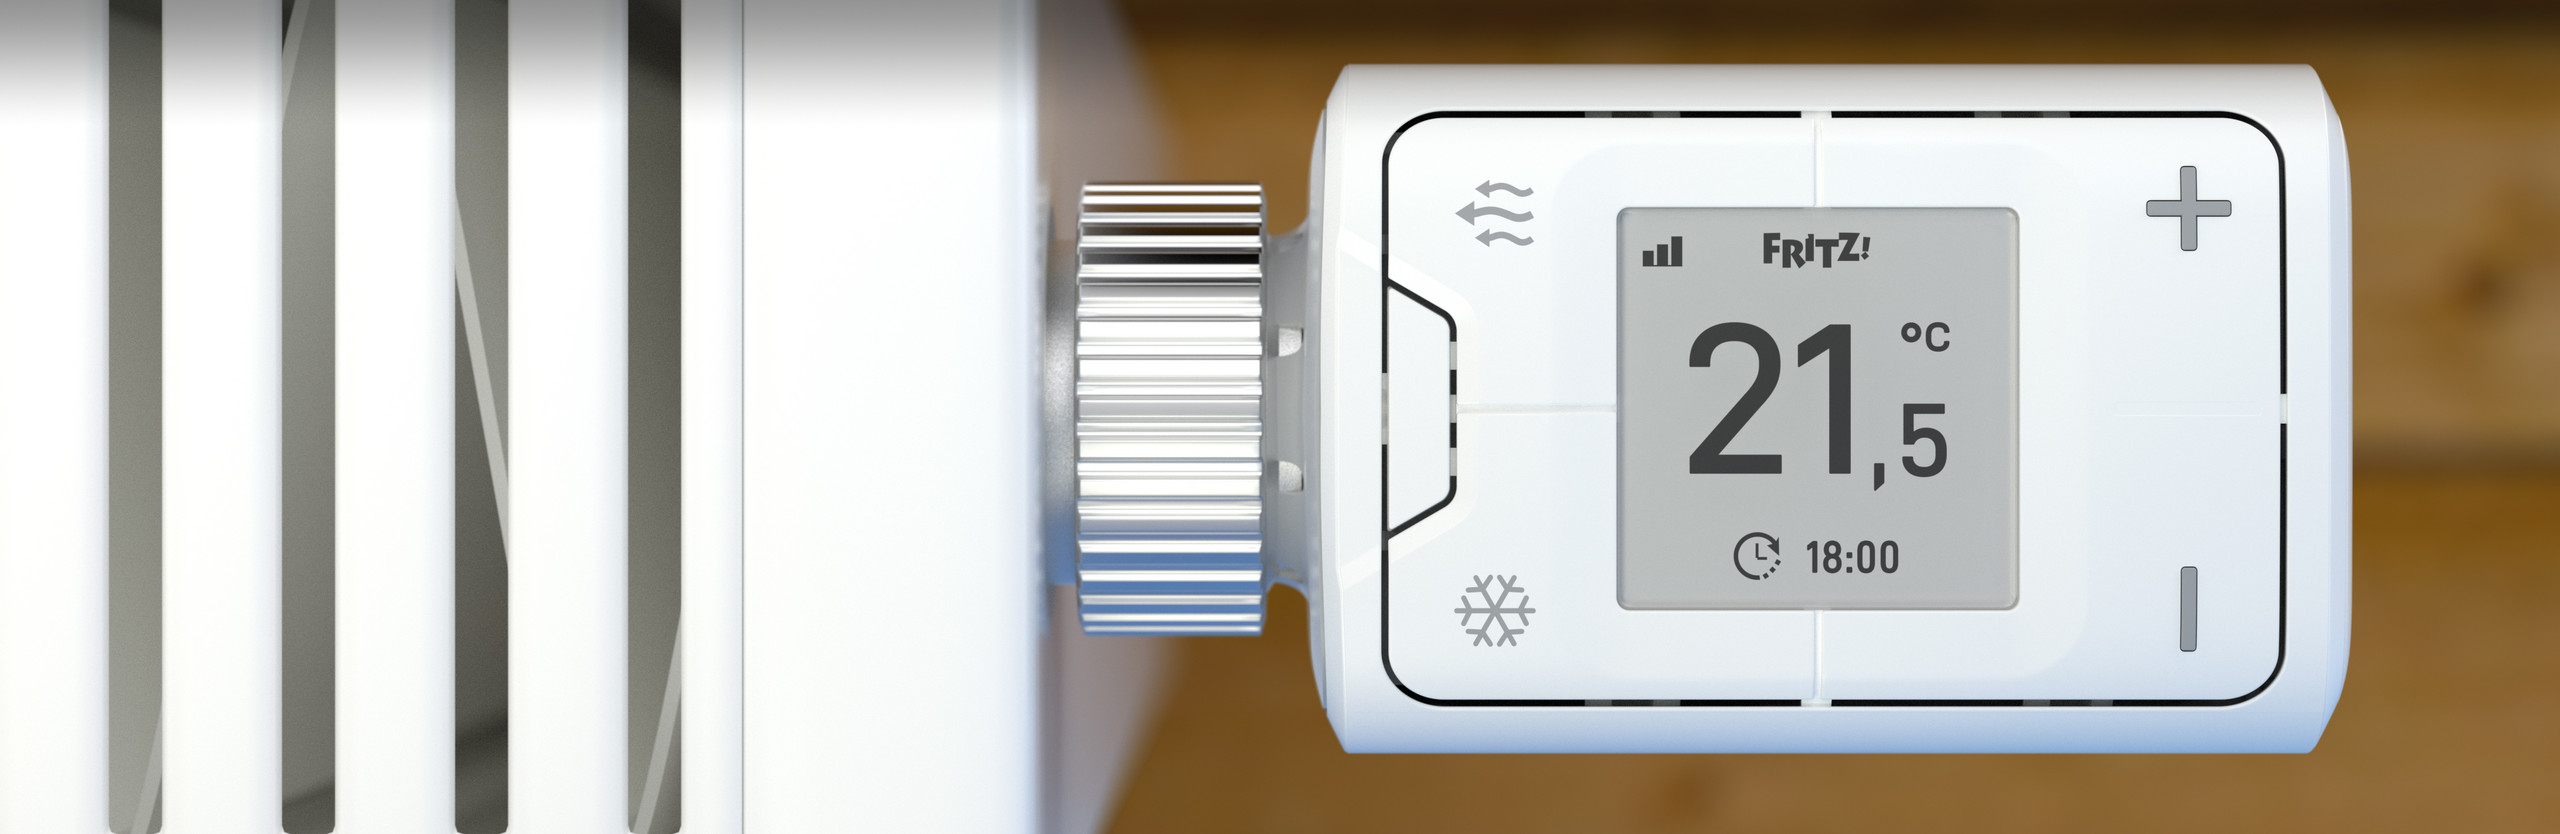 Fritz!DECT 302 thermostat shows as being 'heating' when it is not  (integration: FRITZ!SmartHome) · Issue #104083 · home-assistant/core ·  GitHub